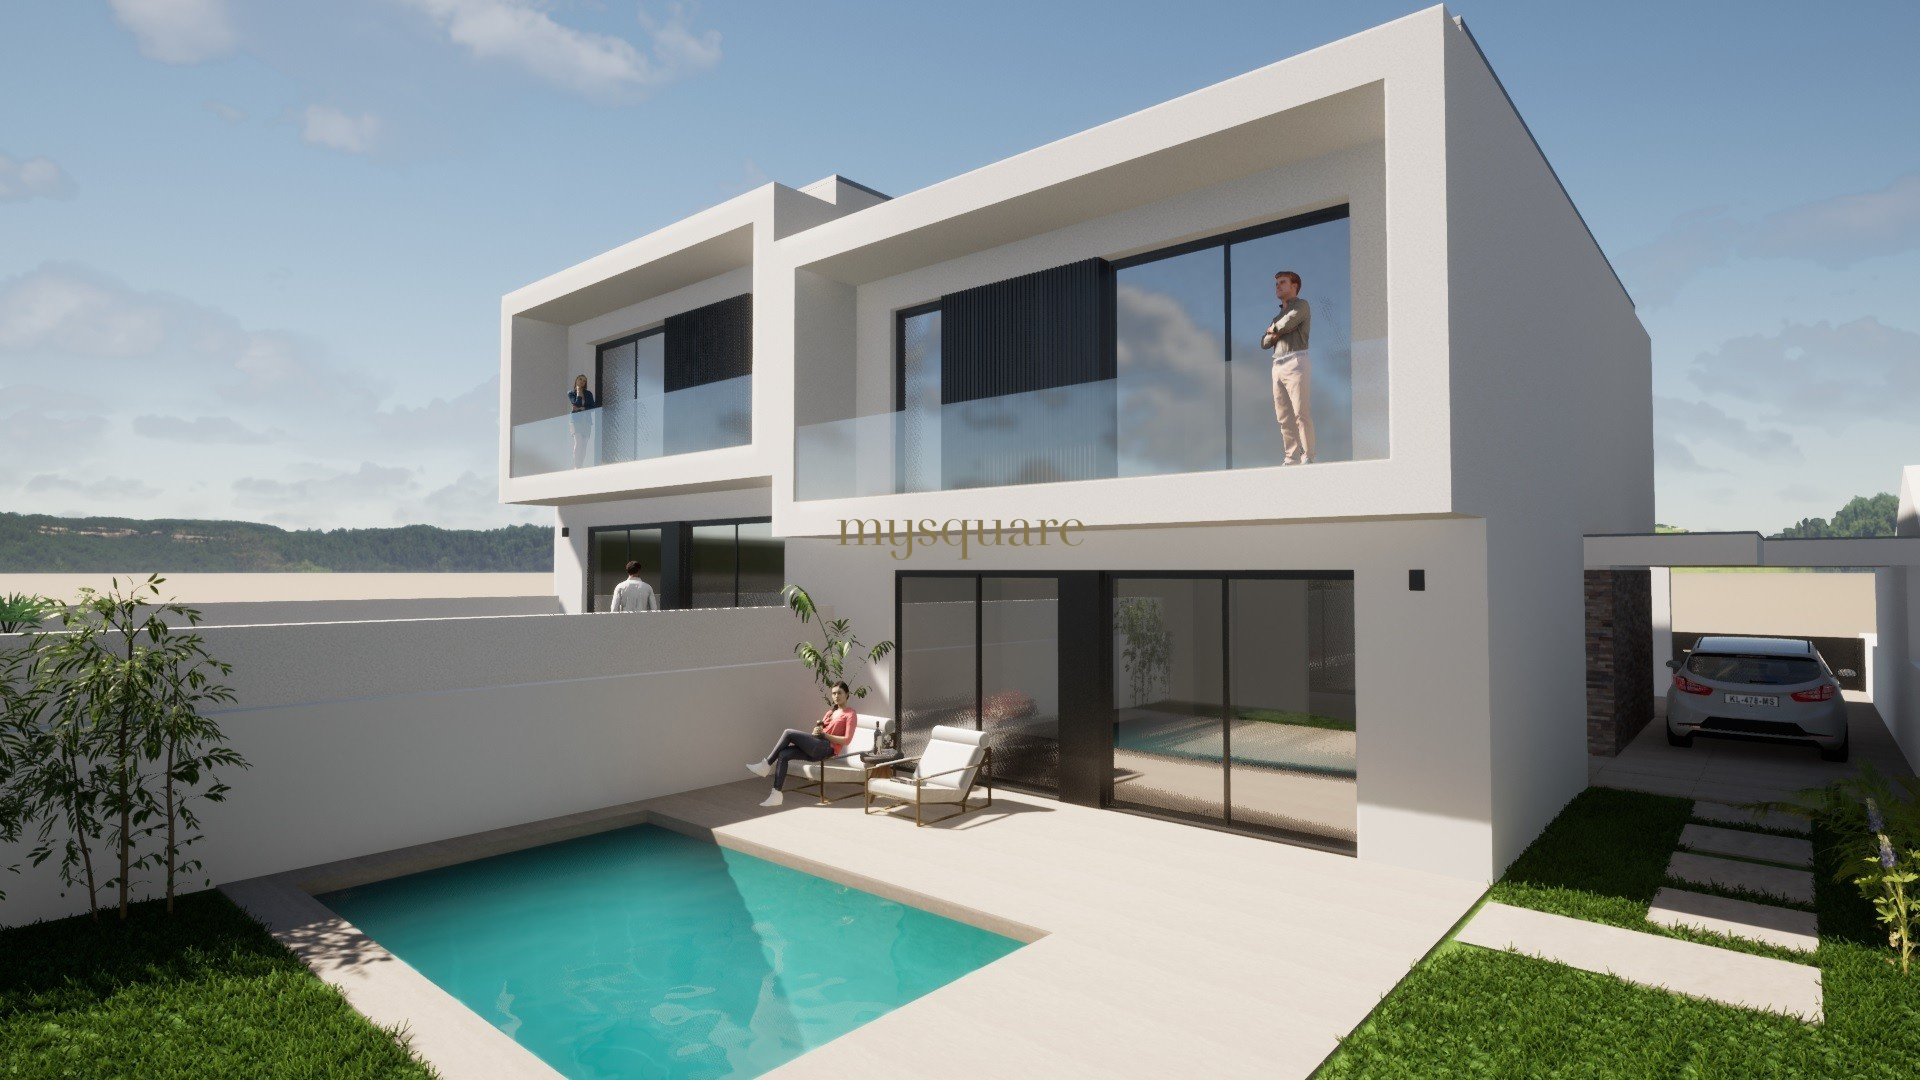 House T3 on two fronts, with swimming pool - Arcozelo, Vila Nova de Gaia